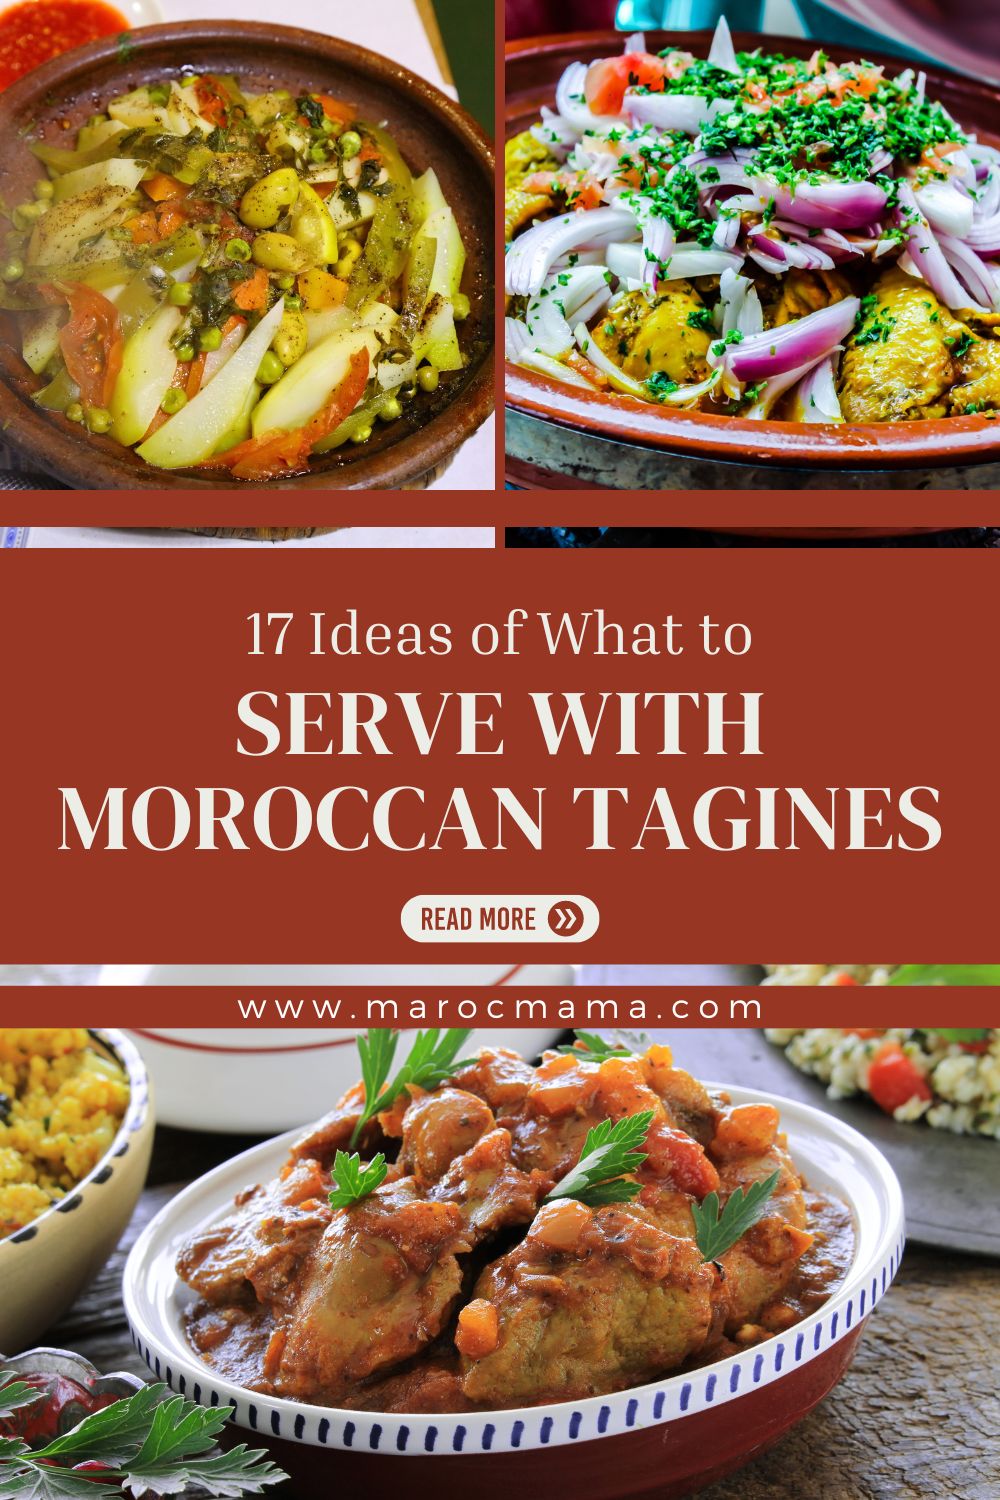 17 Ideas Of What to Serve with Moroccan Tagines